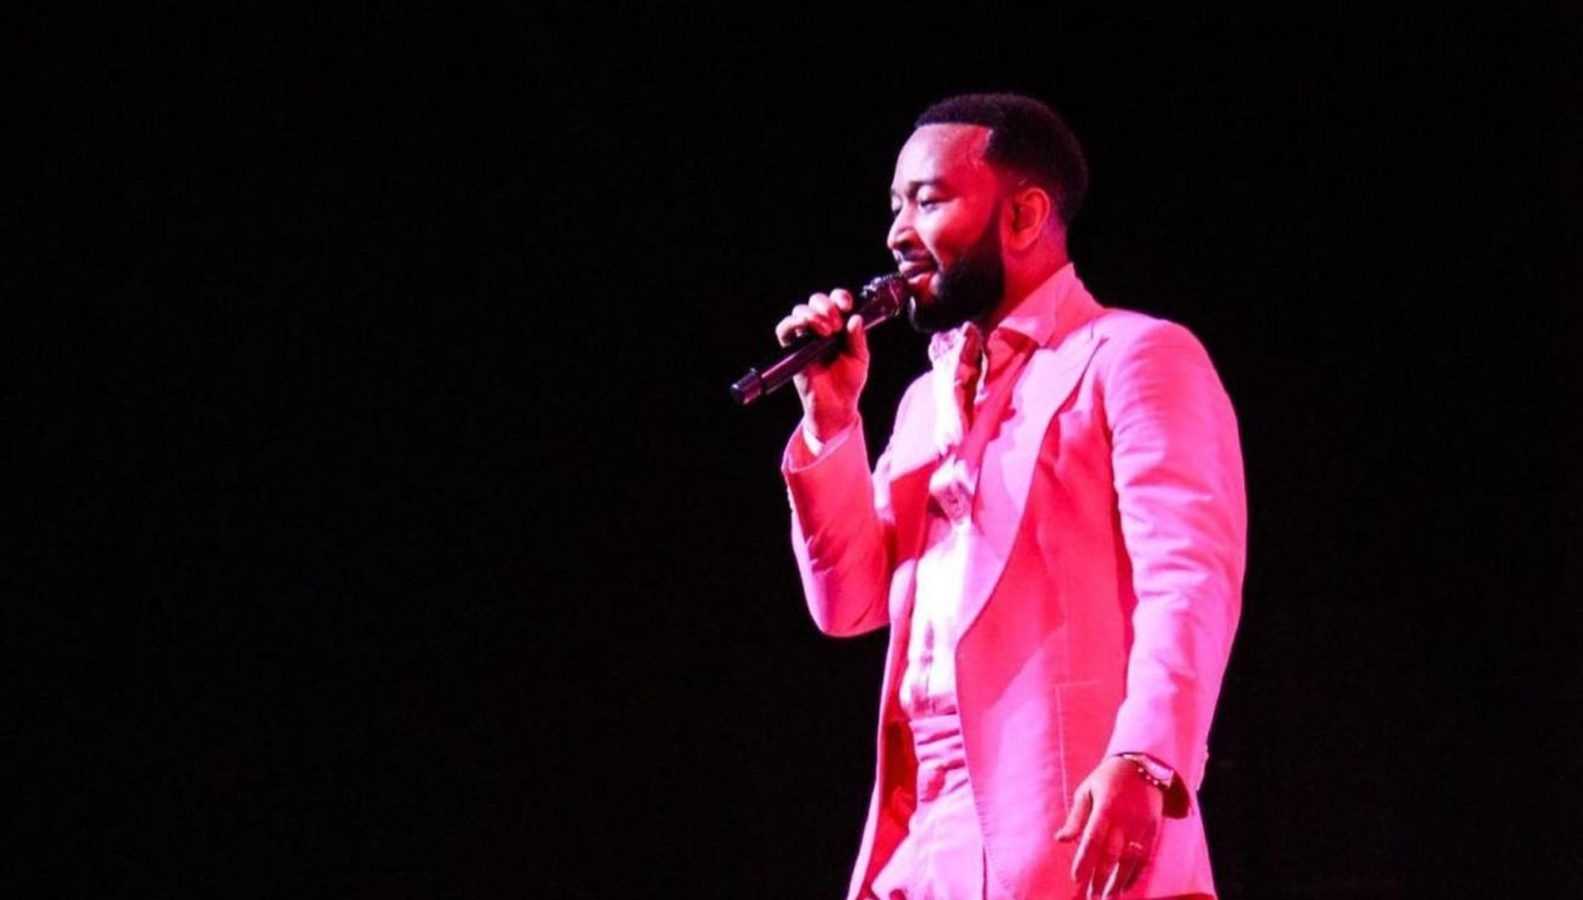 John Legend has launched a music-based NFT platform called ‘OurSong’